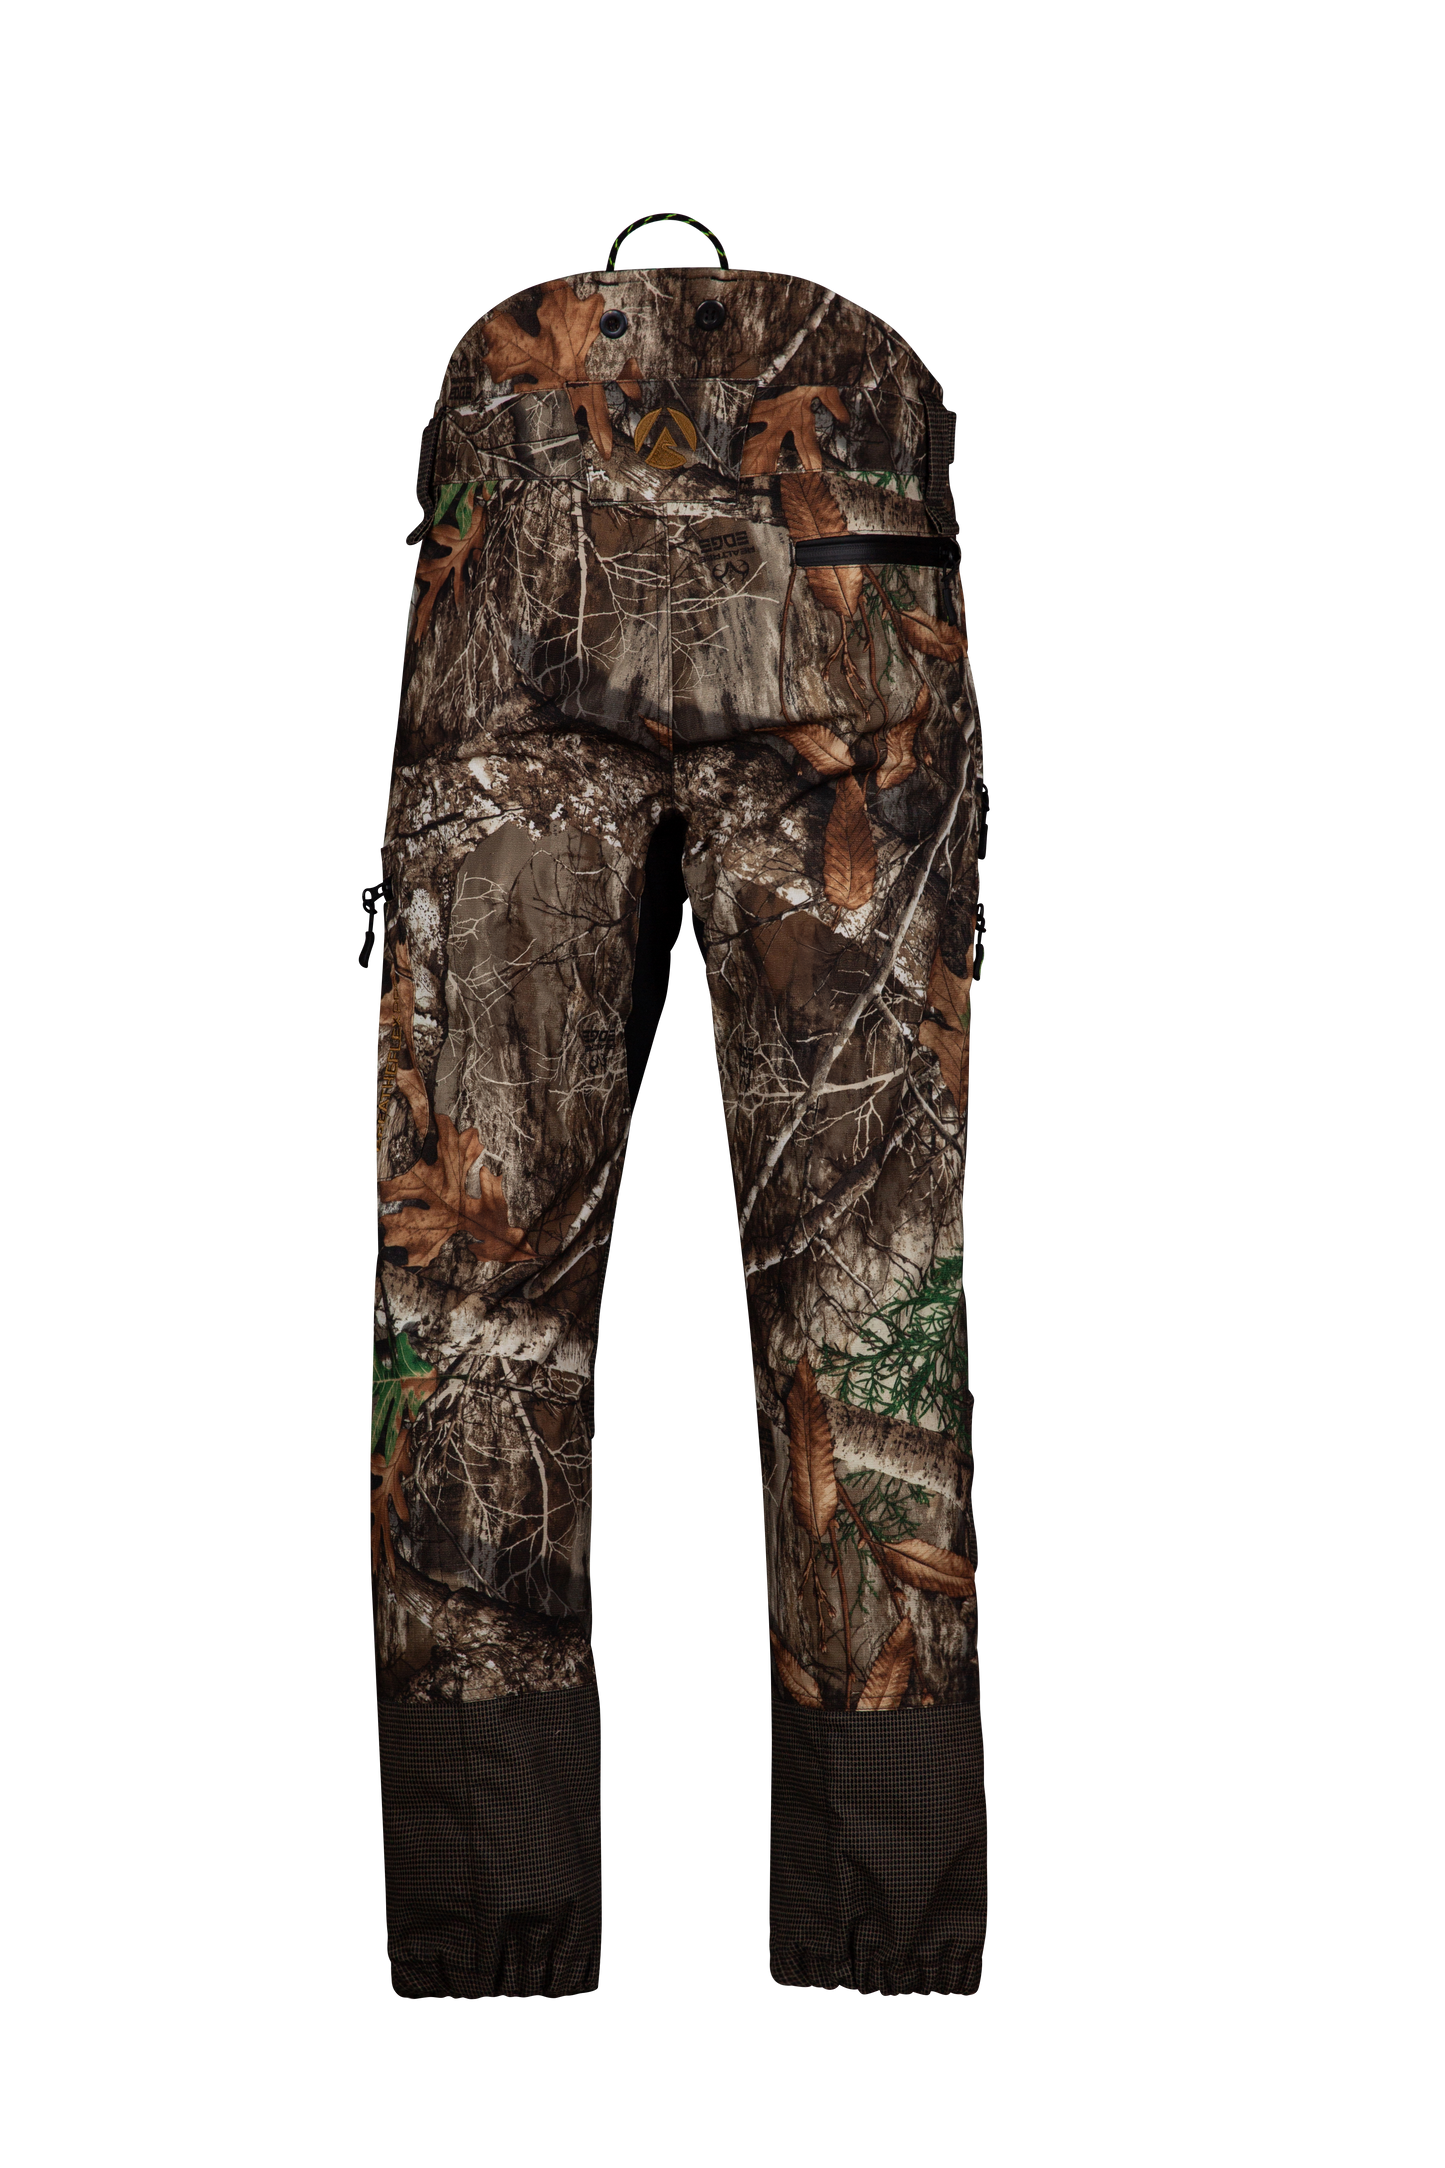 AT4070 - Breatheflex Pro Realtree Chainsaw Trousers Design C/Class 1 - Brown